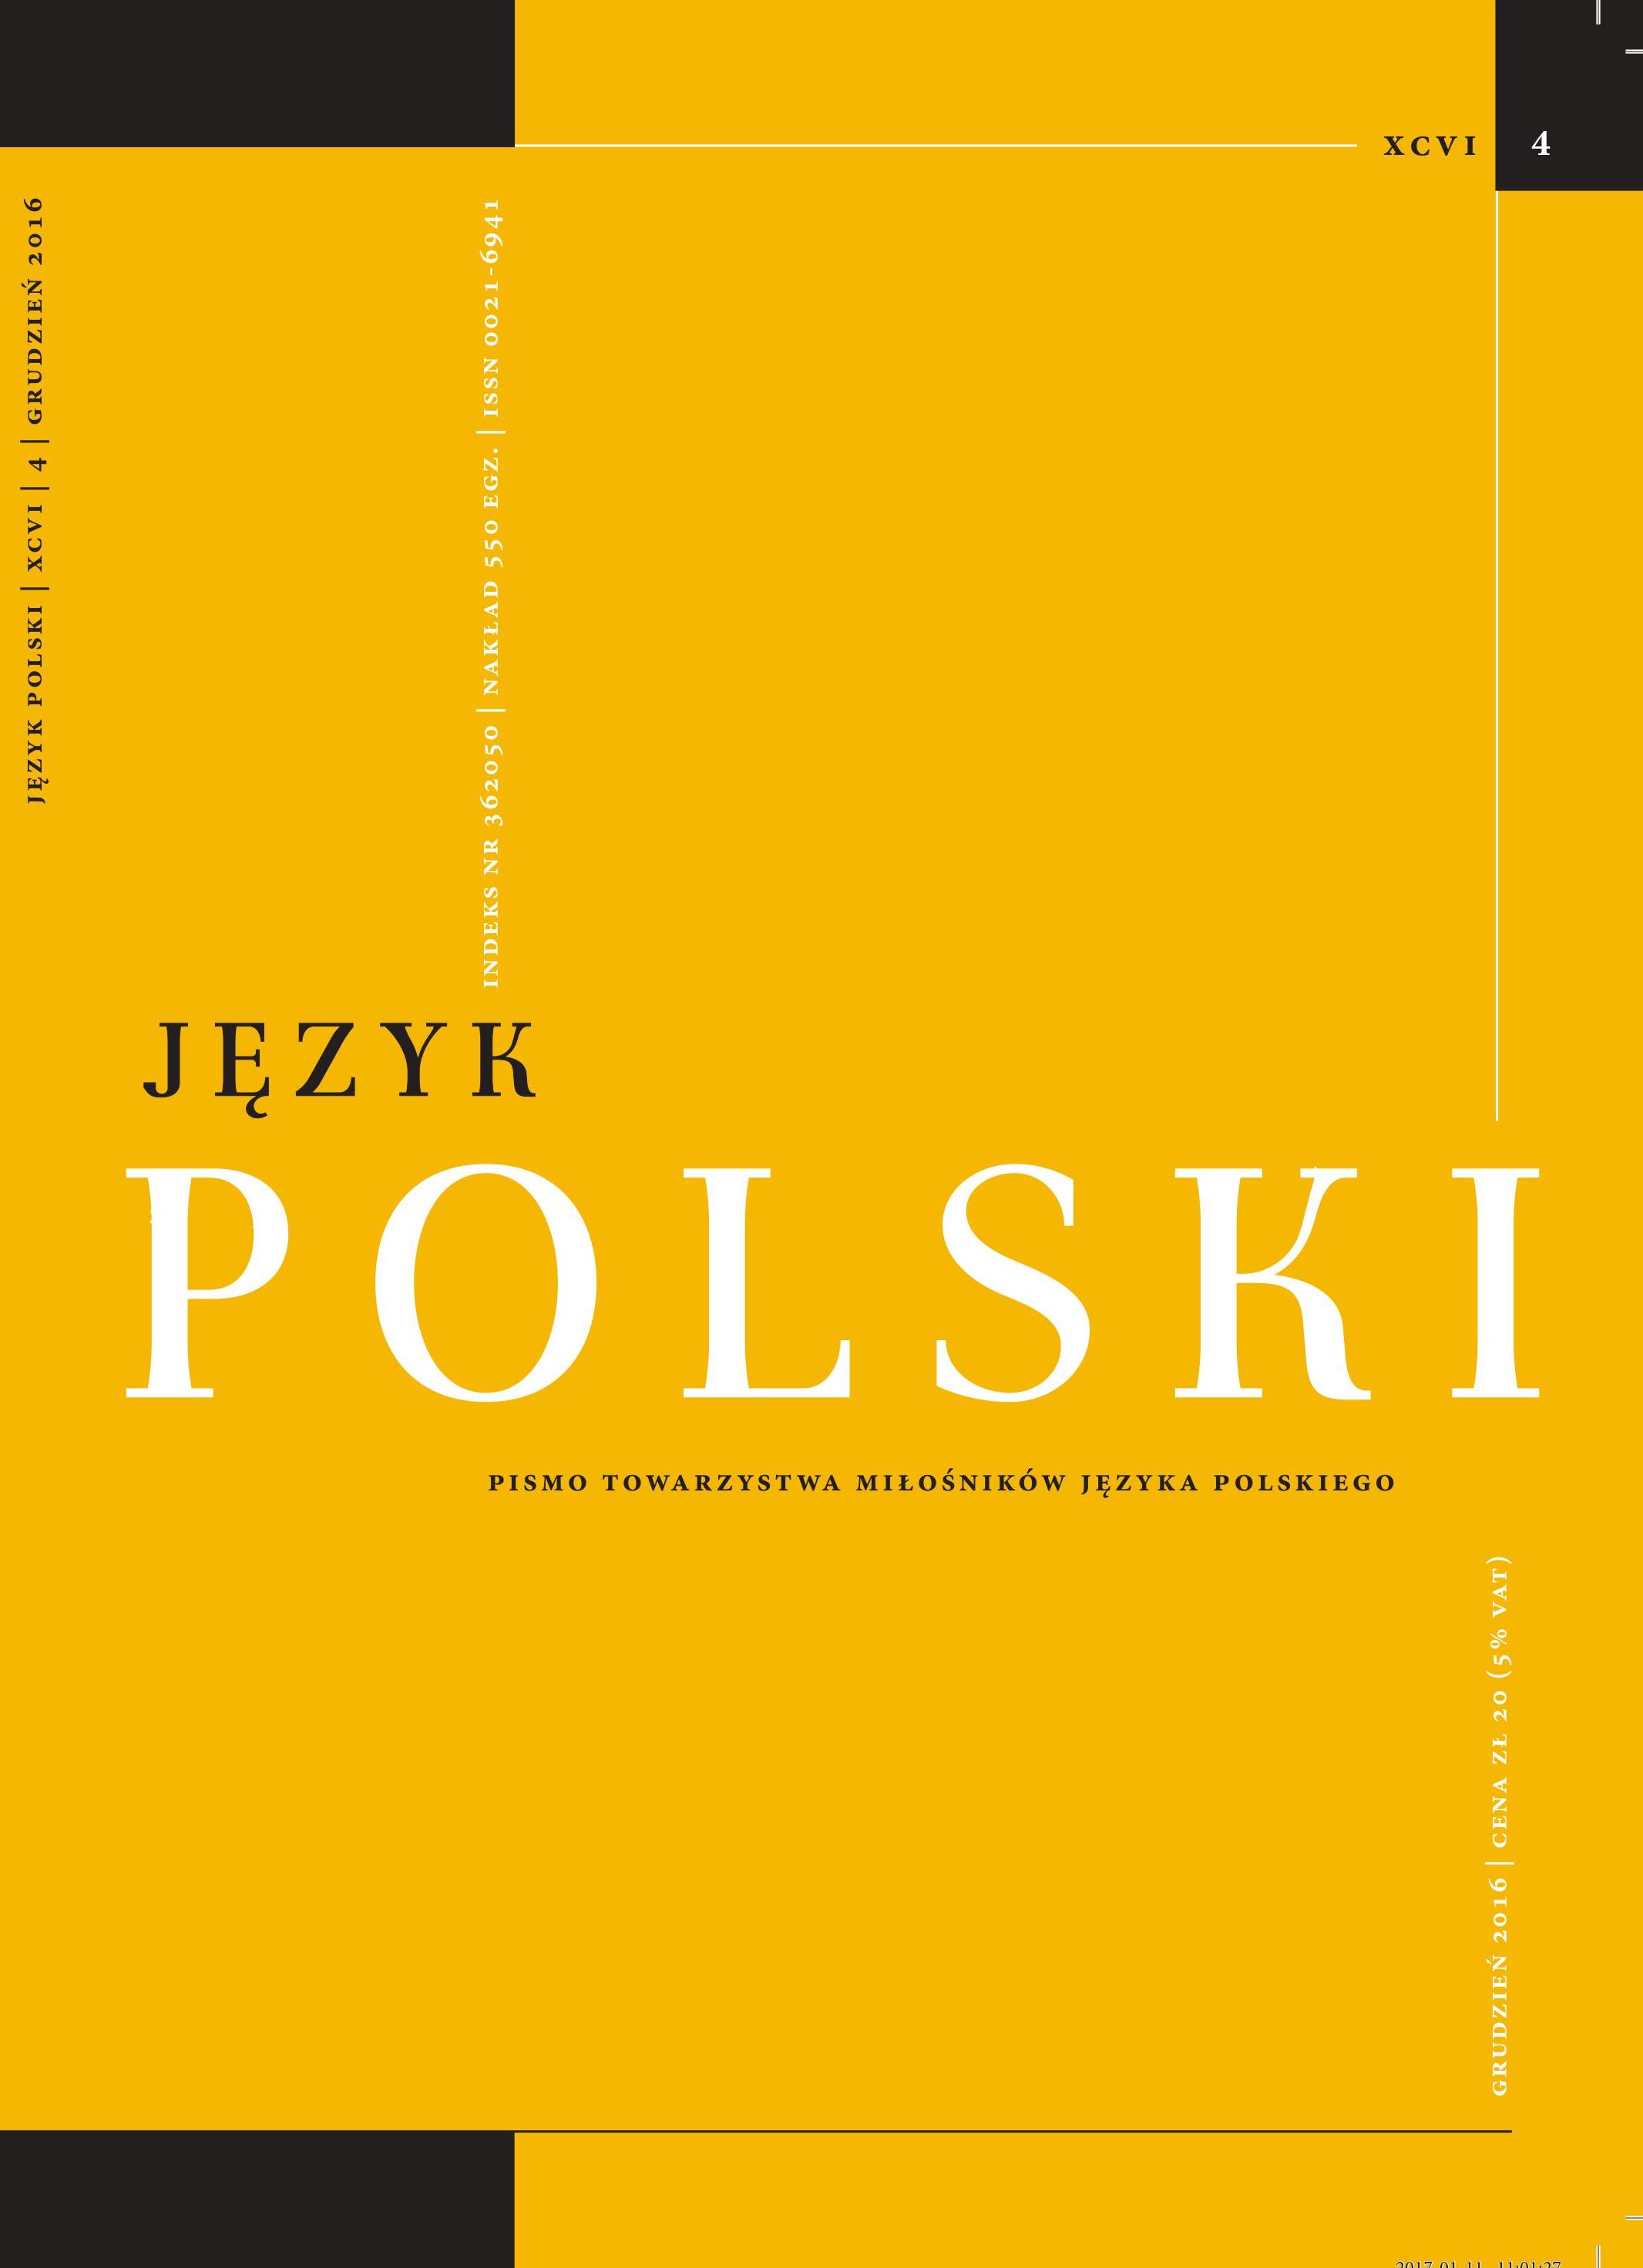 Biblia Tysiąclecia in relation to the tradition of biblical Polish language – anniversary remarks Cover Image